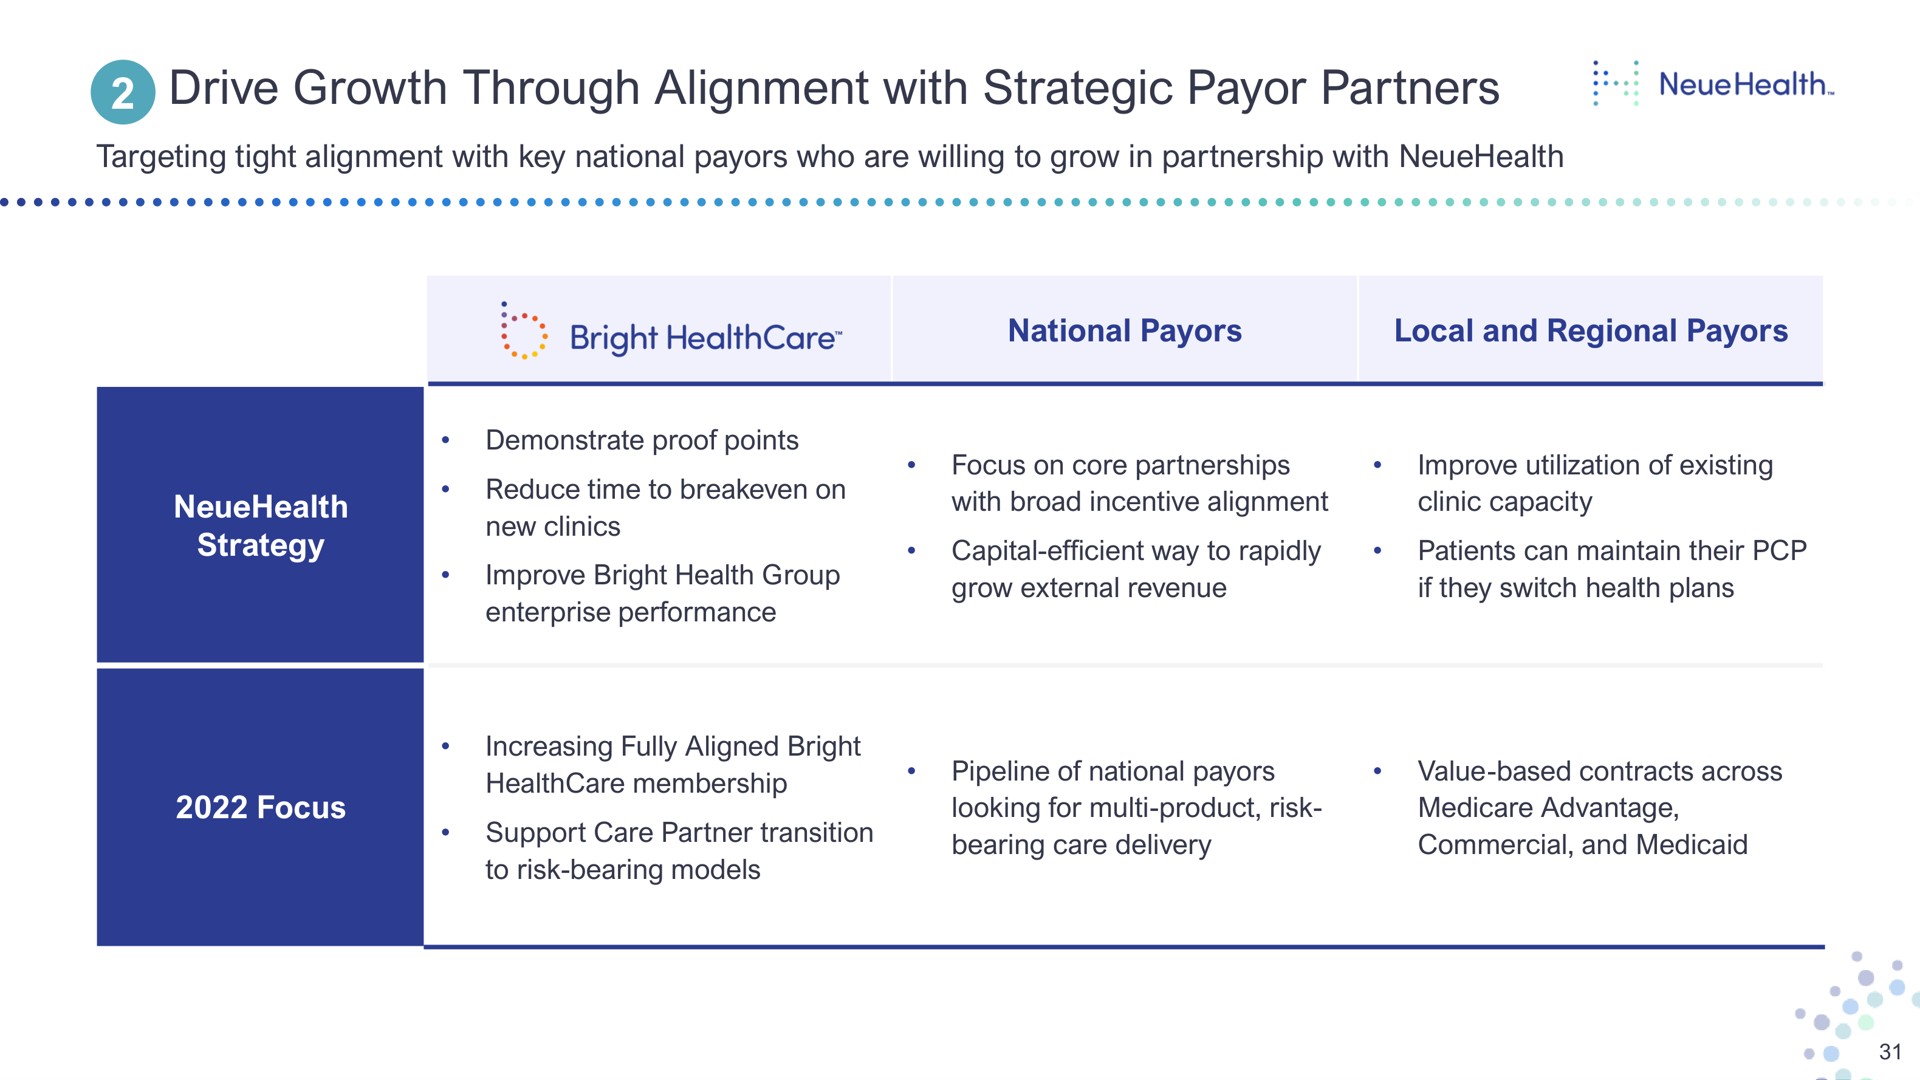 drive growth through alignment with strategic payor partners targeting tight key national who are willing to grow in partnership strategy bright improve bright health group enterprise performance increasing fully aligned bright membership support care partner transition to risk bearing models national local and regional focus on core partnerships broad incentive capital efficient way to rapidly grow external revenue pipeline of national bearing care delivery improve utilization of existing clinic capacity if they switch health plans advantage | Bright Health Group